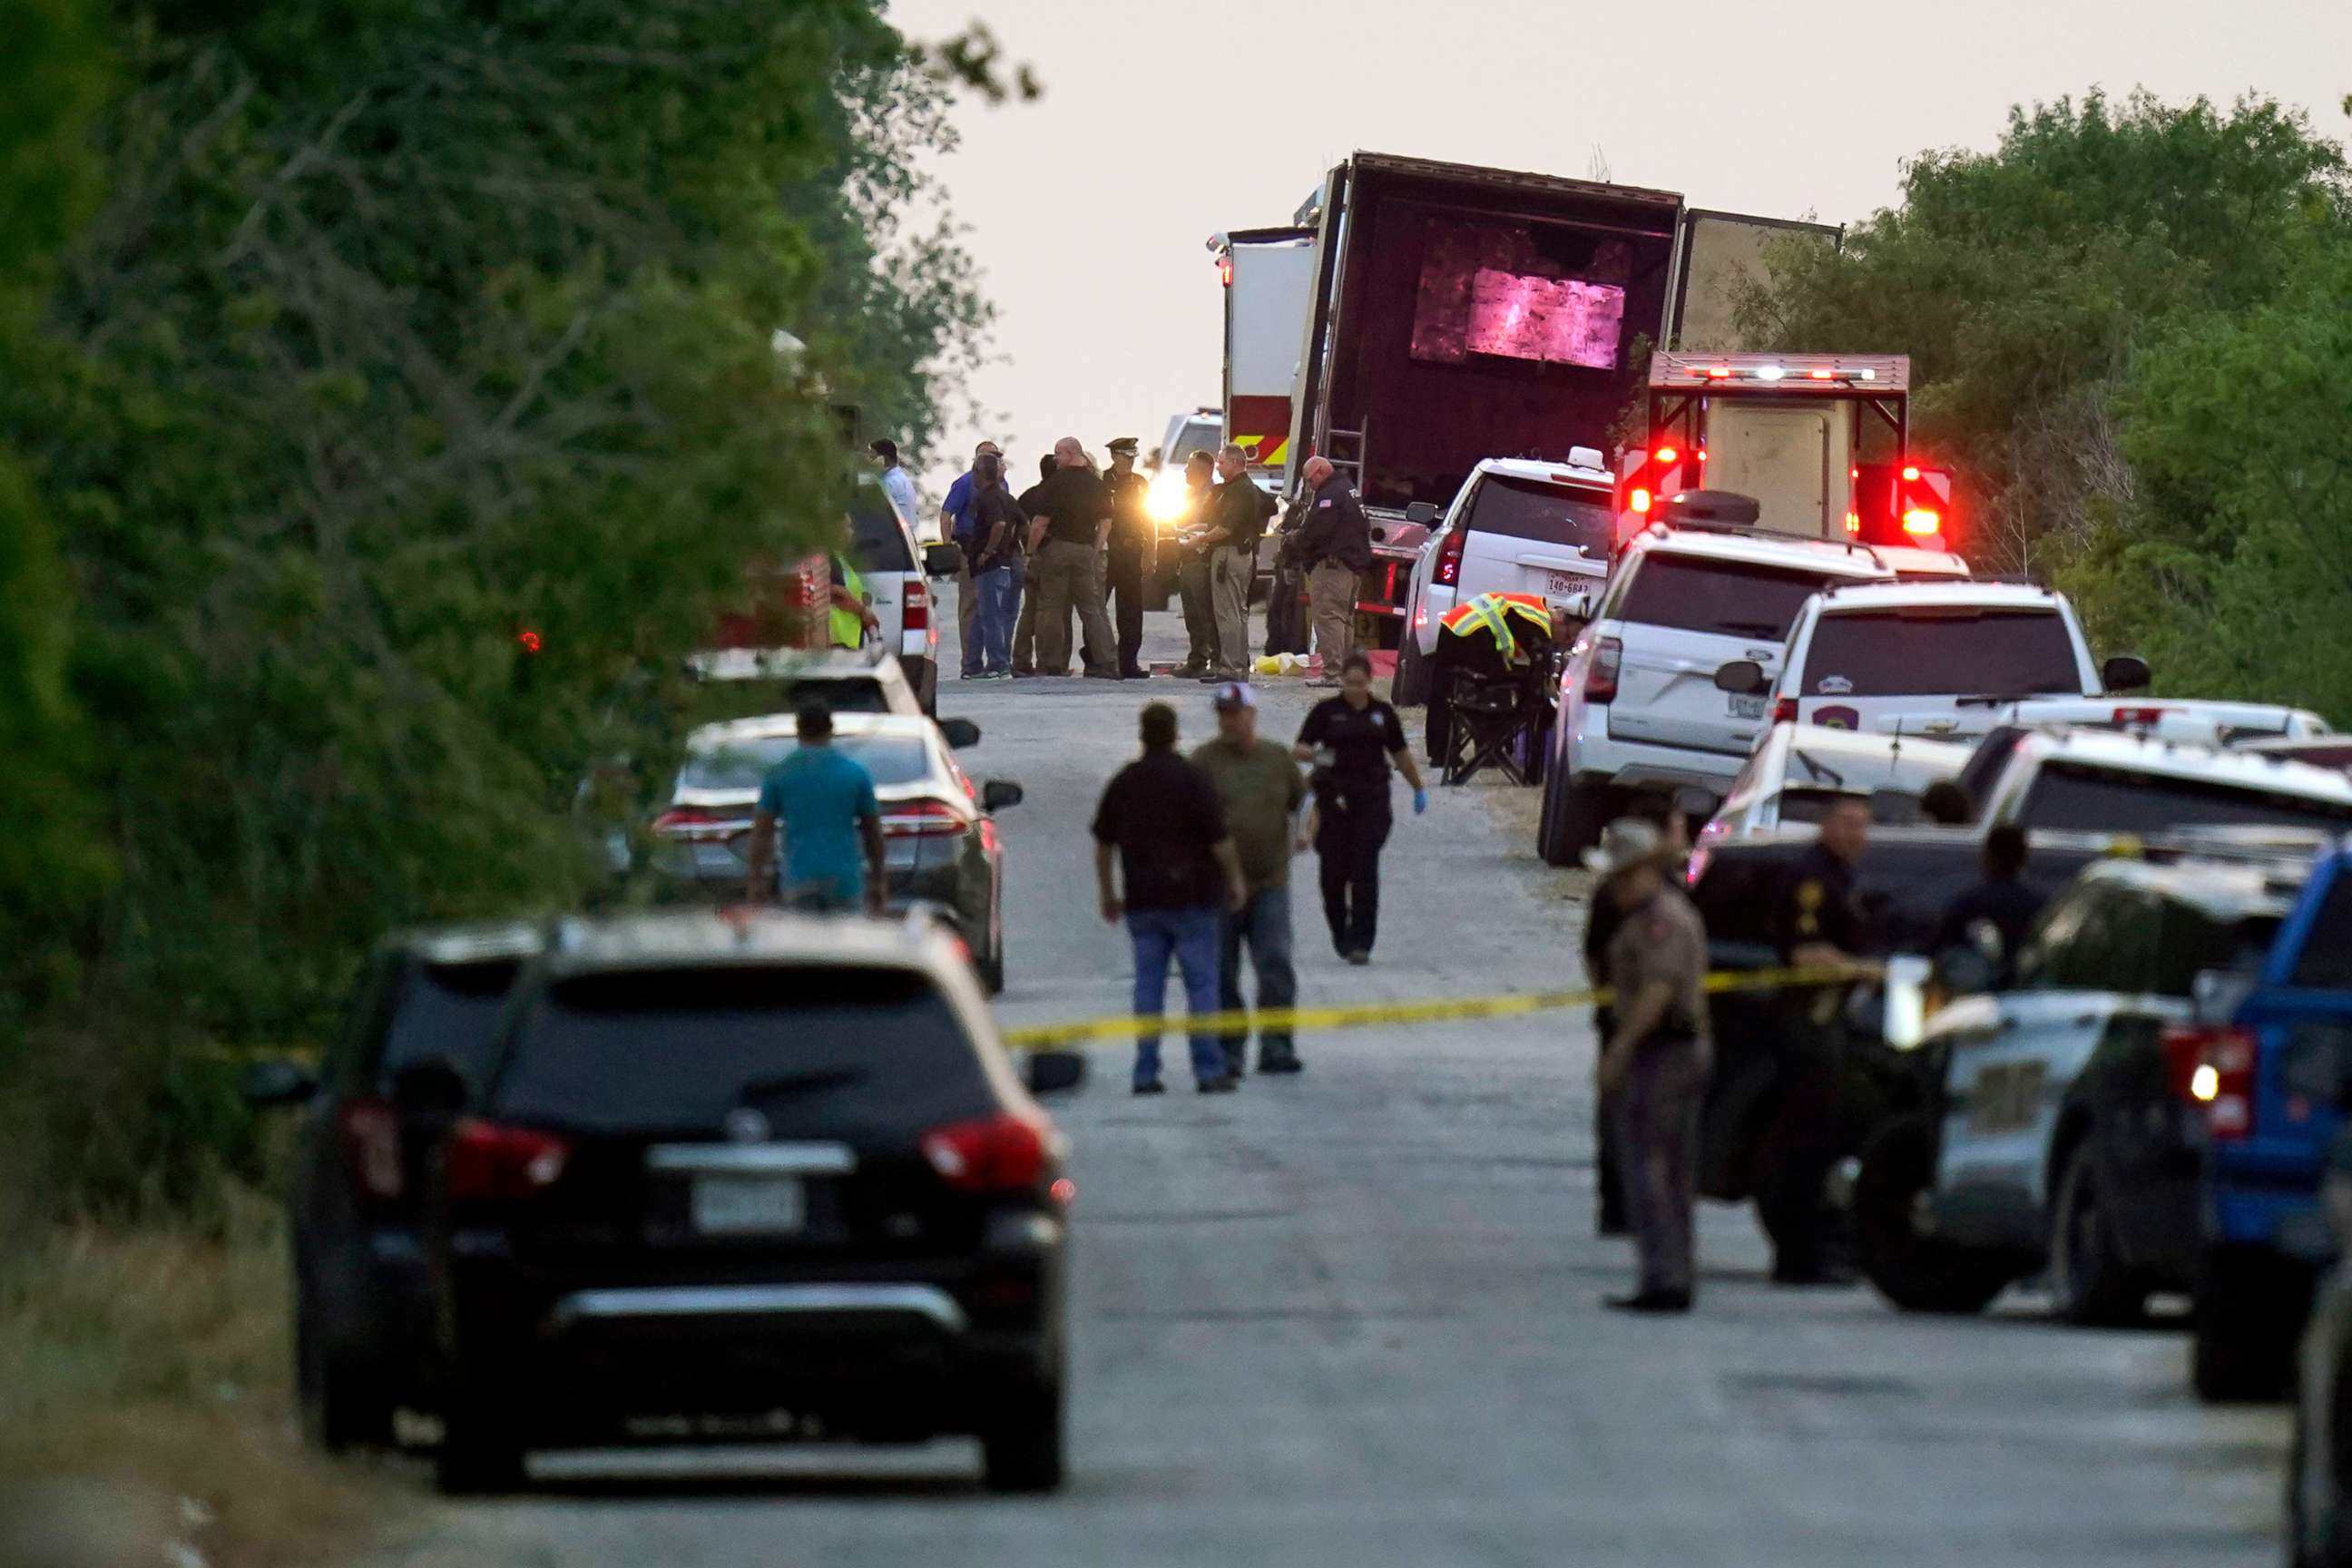 PHOTO: In this June 27, 2022, file photo, police and other first responders work the scene where dozens of people were found dead and multiple others were taken to hospitals after a tractor-trailer containing suspected migrants was found in San Antonio.